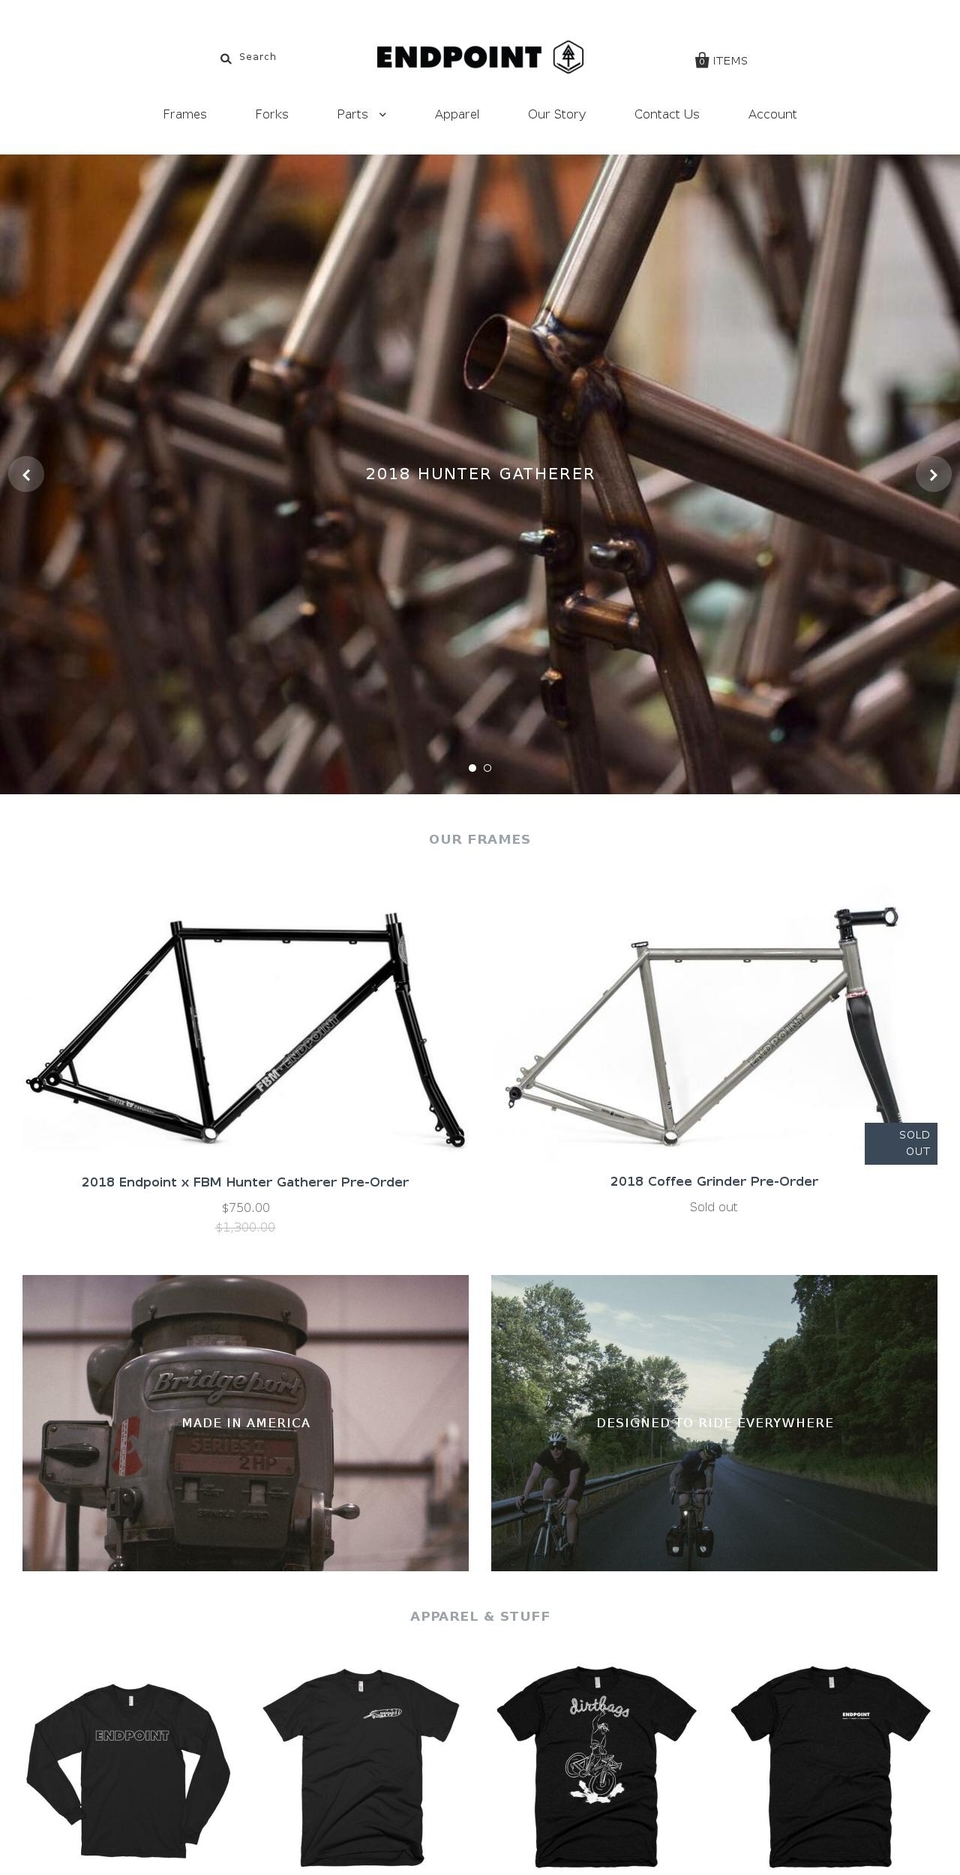 V2 Shopify theme site example endpointbikes.com